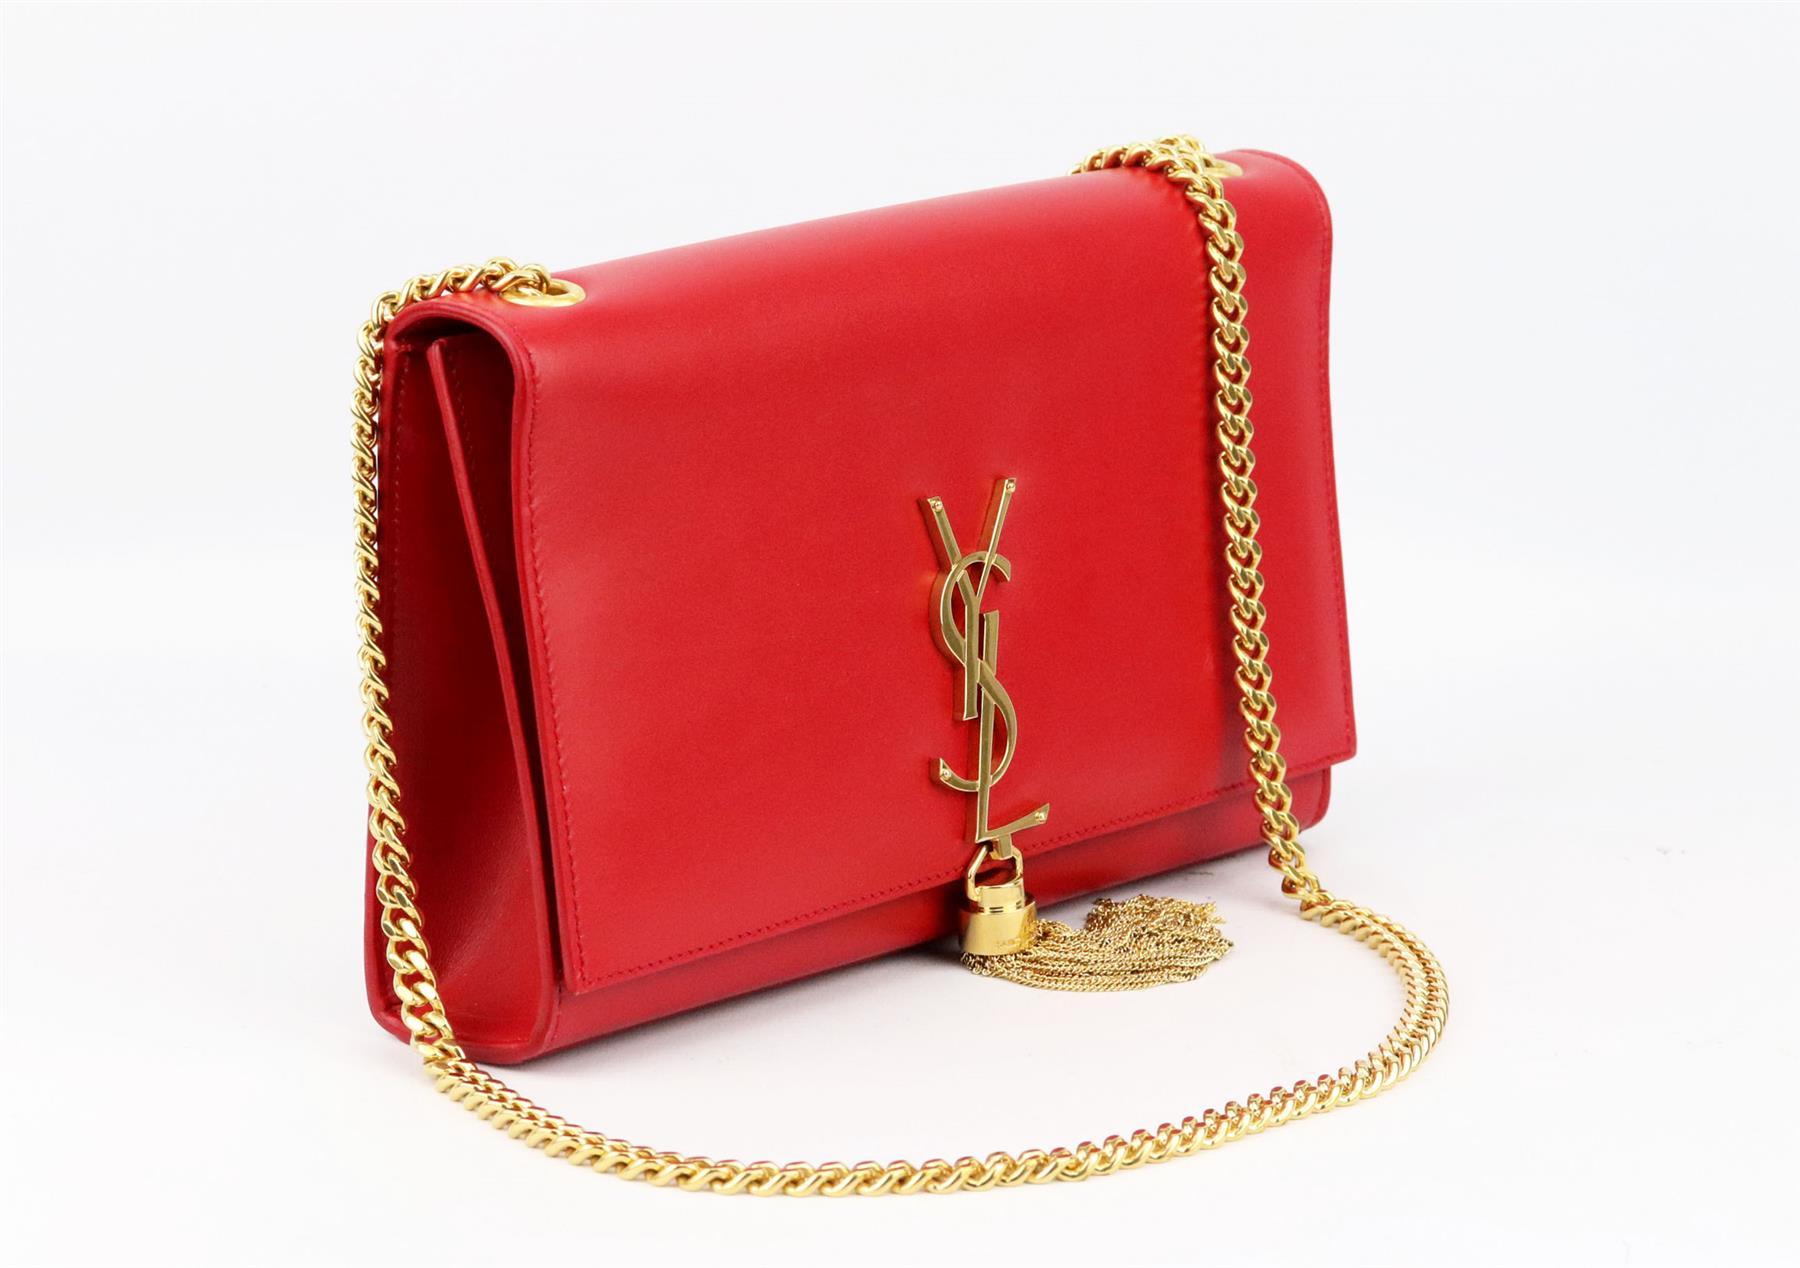 This 'Kate' bag by SAINT LAURENT will suit almost any occasion, embellished with the signature tassel-tipped 'YSL' plaque, it's been crafted in Italy from soft leather and has a durable chain strap that can be adjusted for a shorter drop. Red